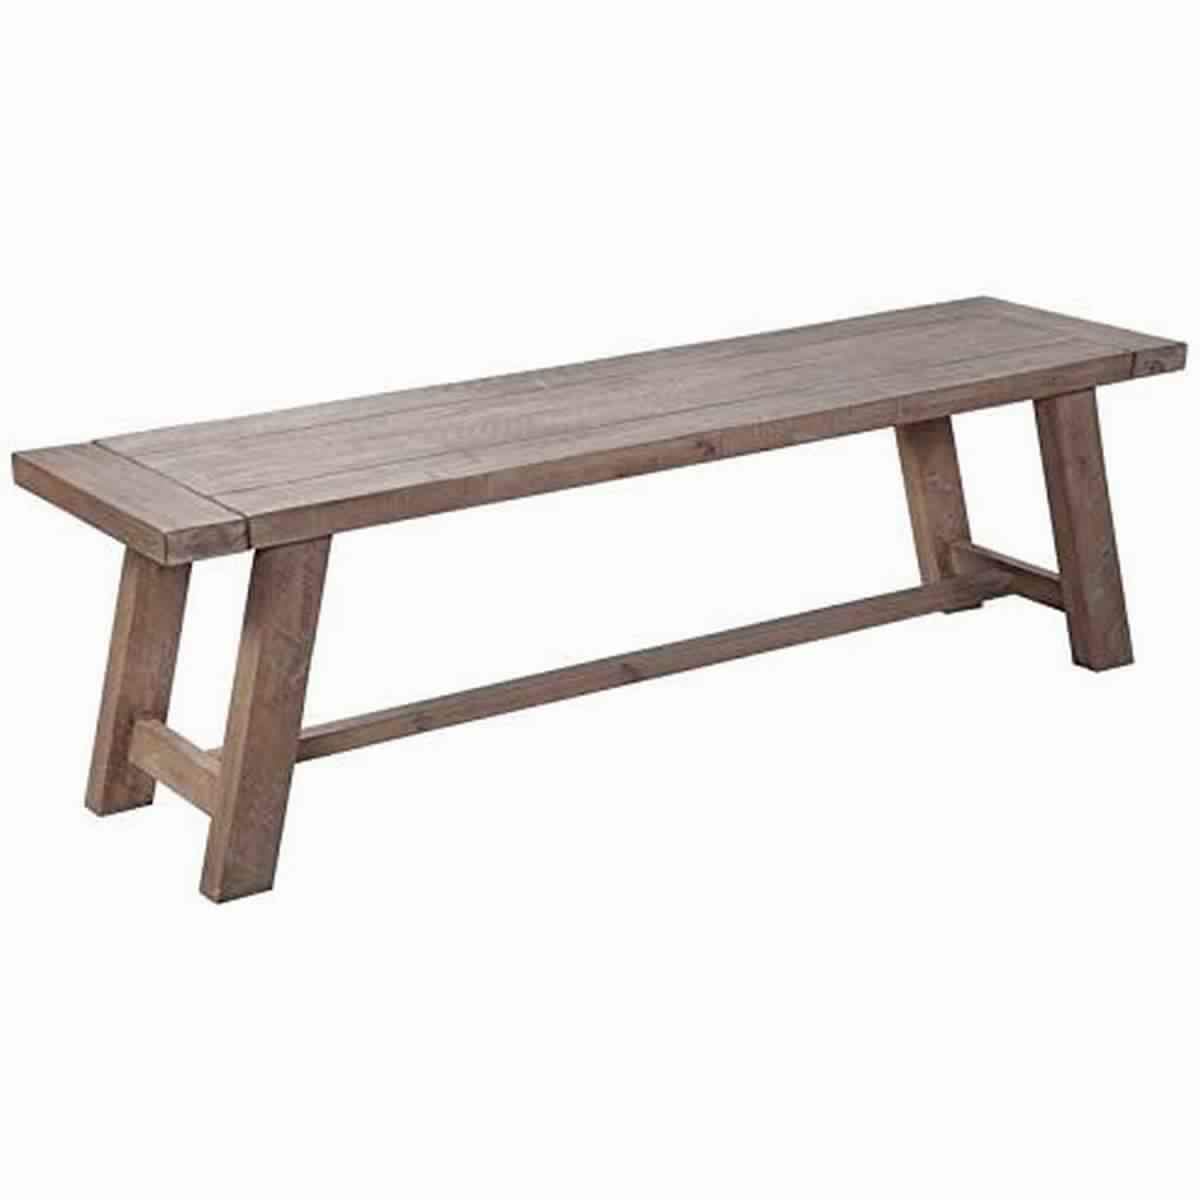 Farmhouse Wooden Dining Bench with Grain Details and Plank Top, Brown - BM220511